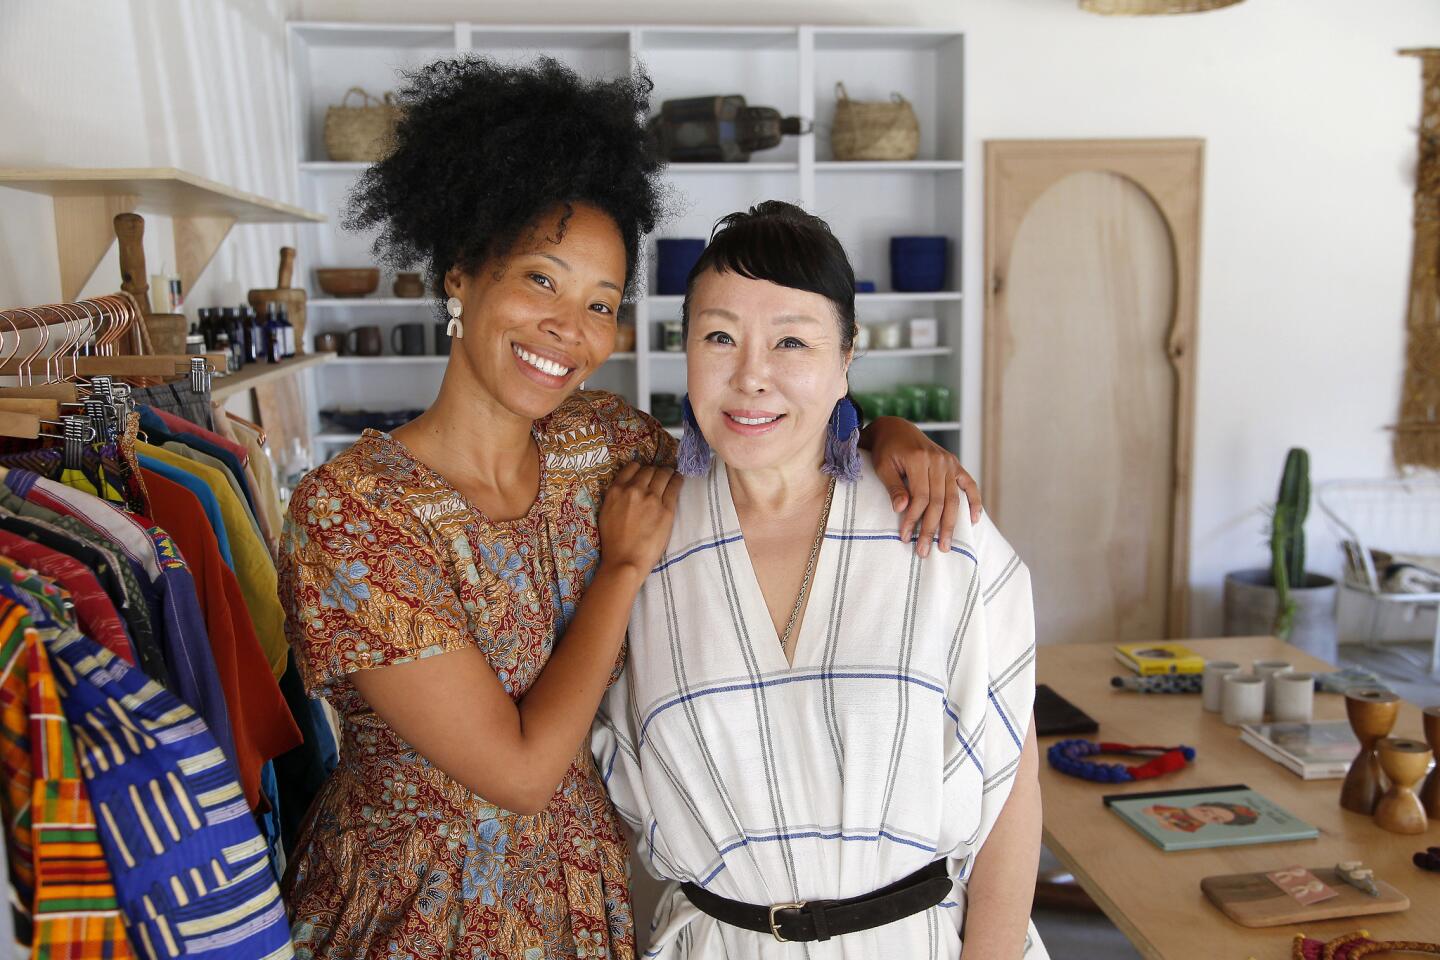 Mariko Mckittrick says her new boutique Marikoko in Leimert Park is an ode to her travels to Morocco and the "wanderlust that inspired my mom [Akiko Yamaguchi]."